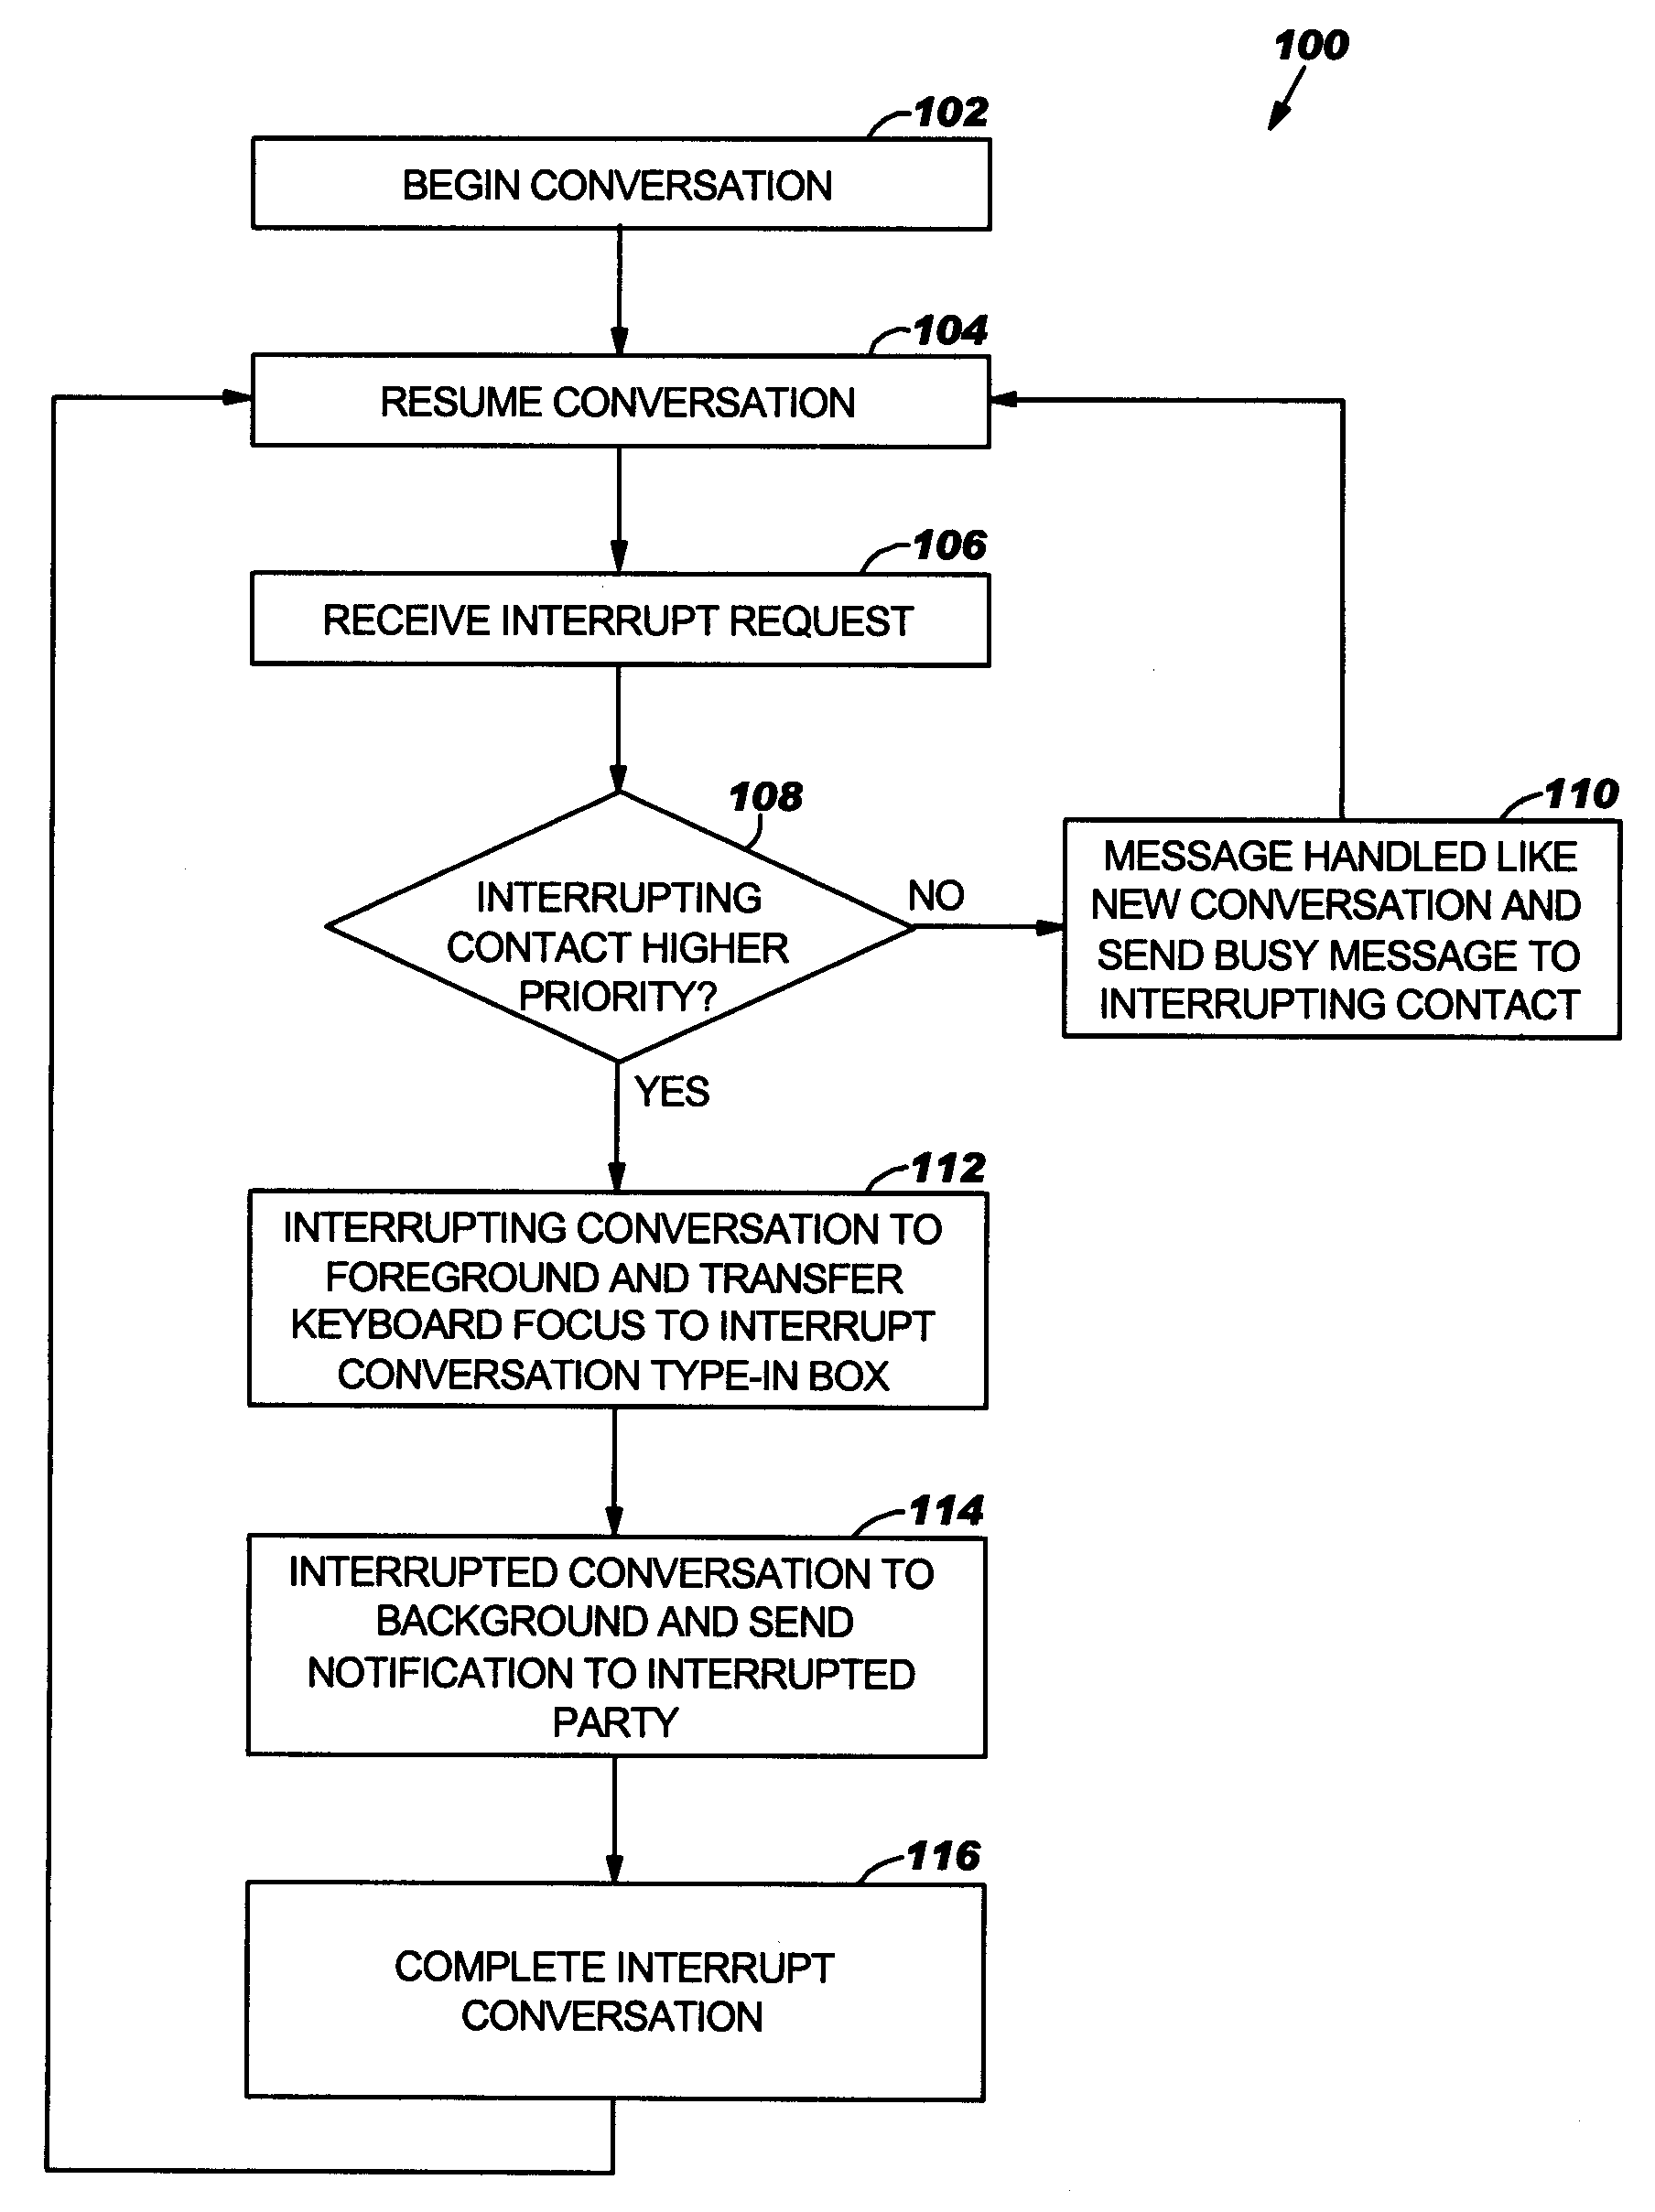 Method and system for managing interrupts in an instant messaging application